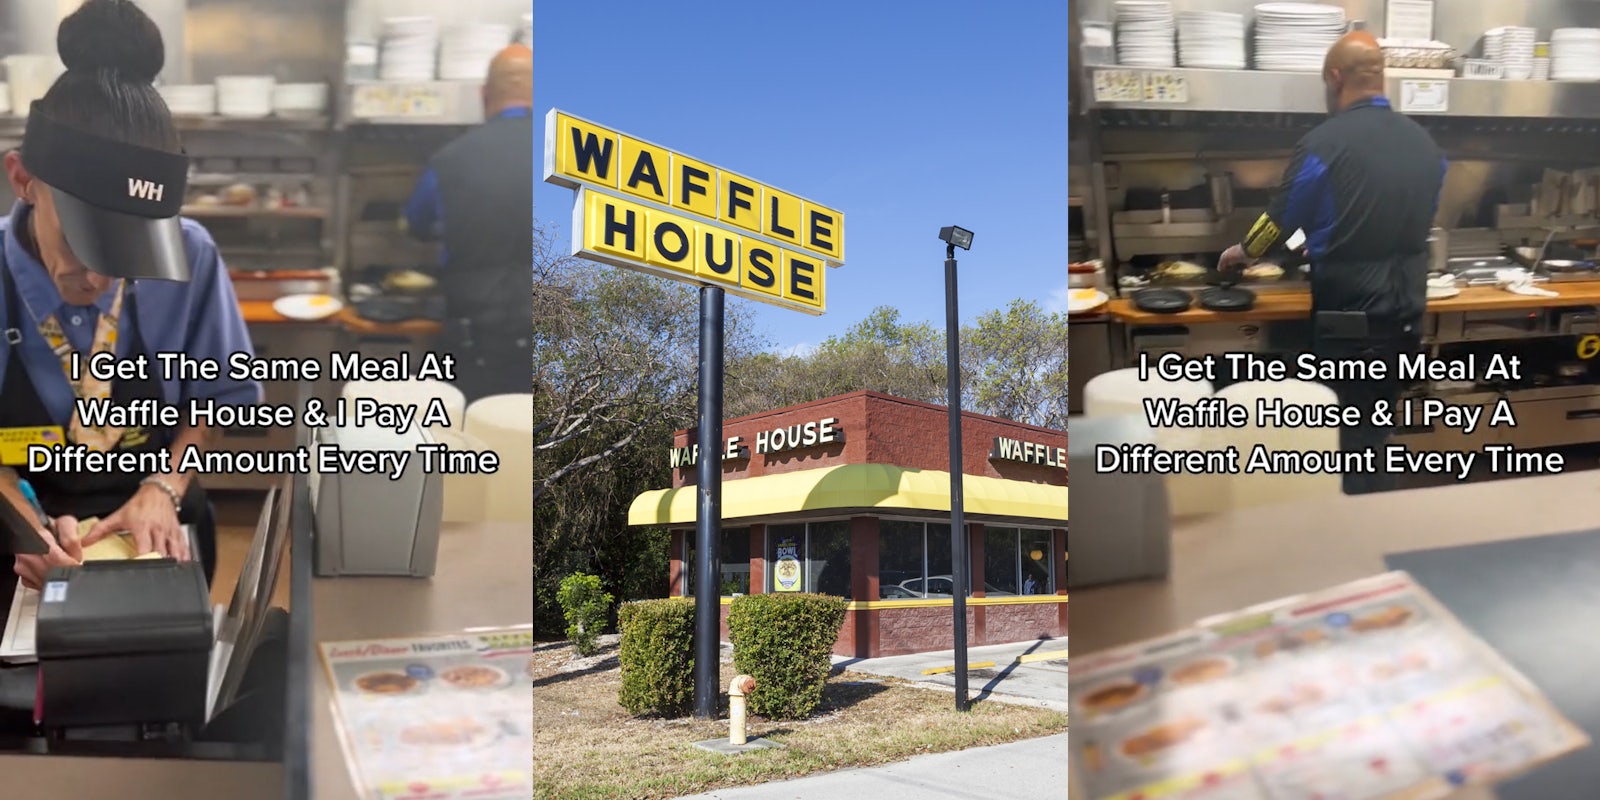 Waffle House worker at counter with caption 'I Get The Same Meal At Waffle House & I Pay A Different Amount Every Time' (l) Waffle House sign in front of Waffle House building (c) Waffle House worker at counter with caption 'I Get The Same Meal At Waffle House & I Pay A Different Amount Every Time' (r)